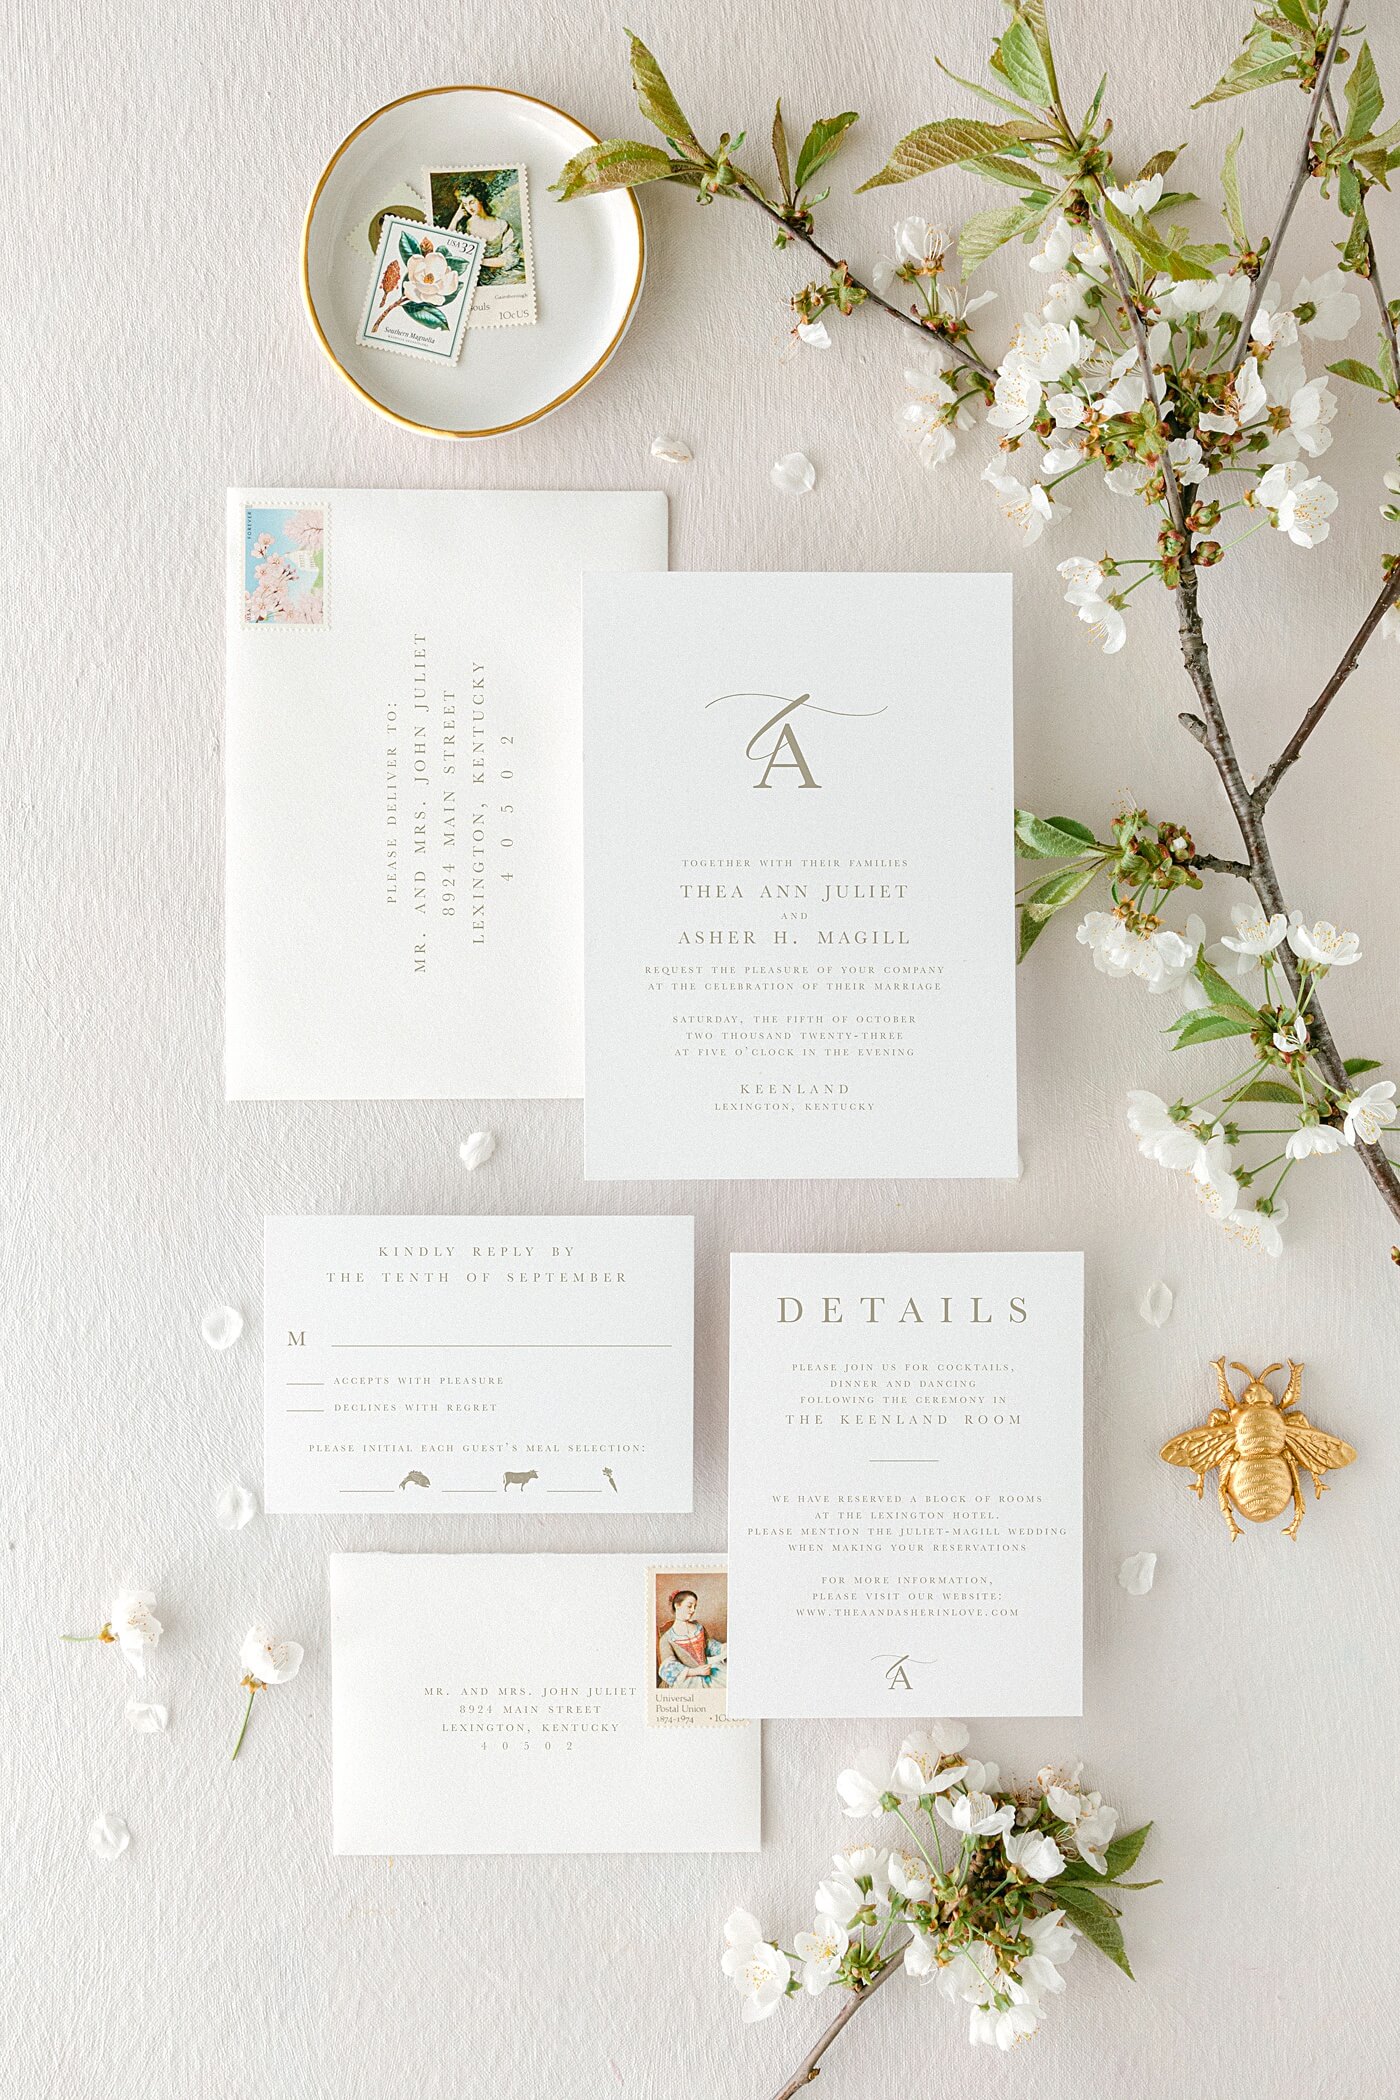 Making Your First Impression Count  Wedding Stationery Guide: Envelopes,  Part II - Banter and Charm